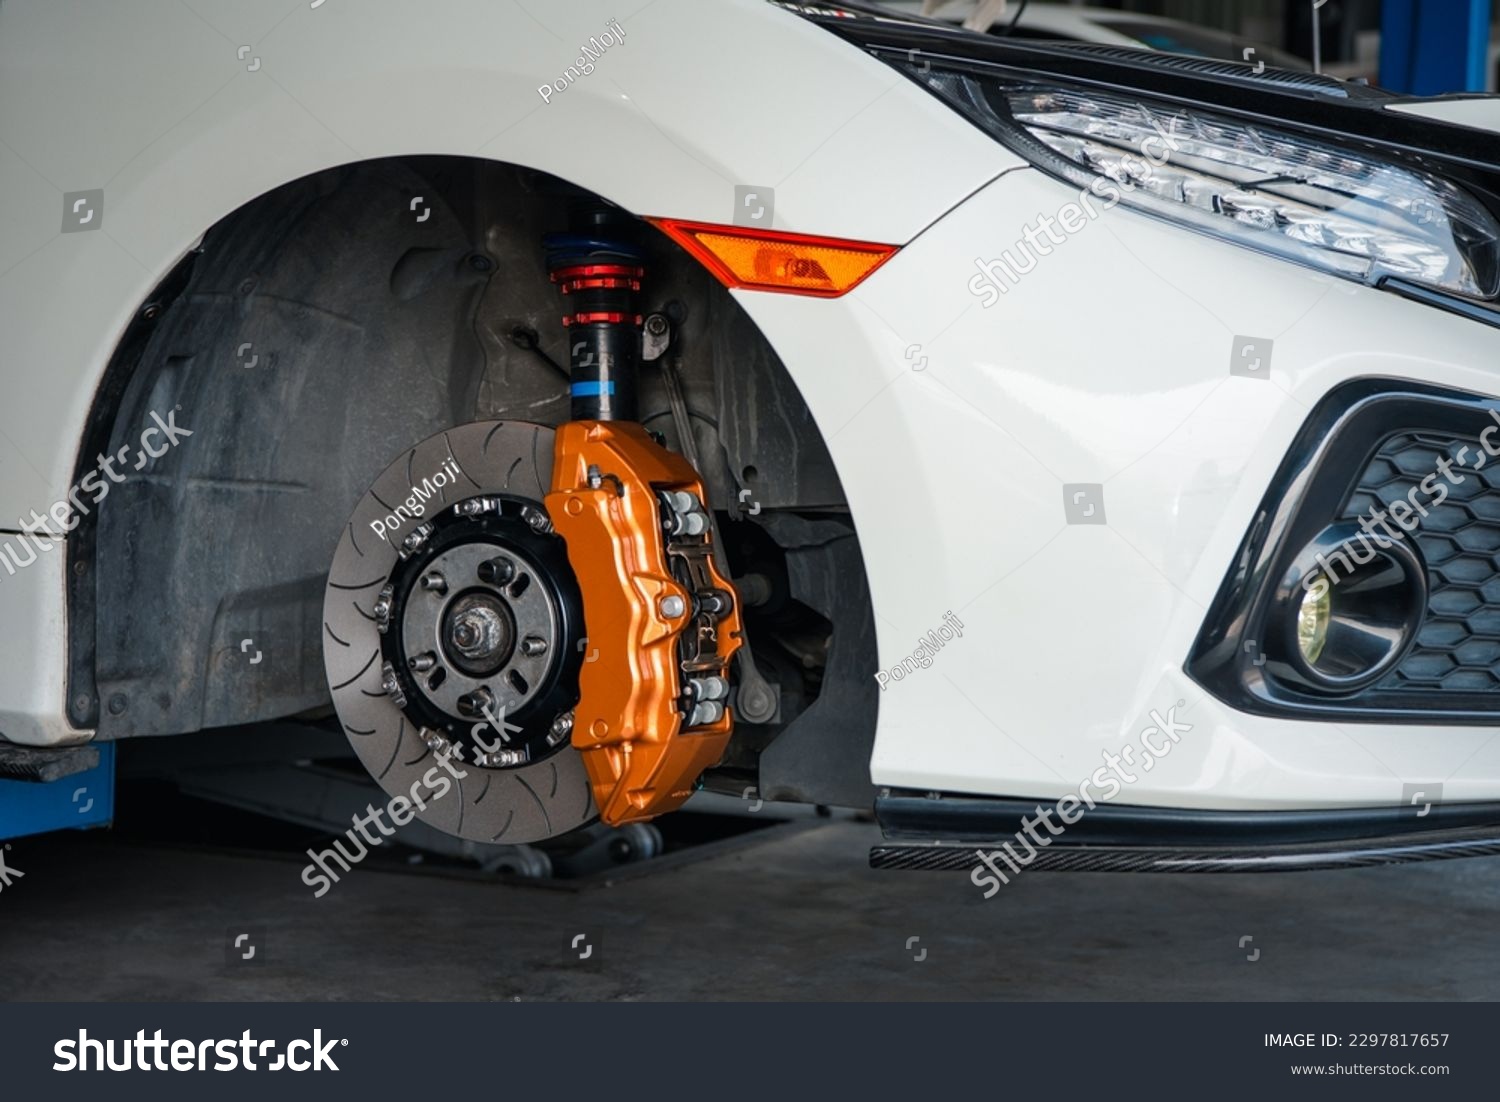 Car mechanic or serviceman disassembly and checking a disc brake and asbestos brake pads for fix and repair problem at car garage or repair shop #2297817657